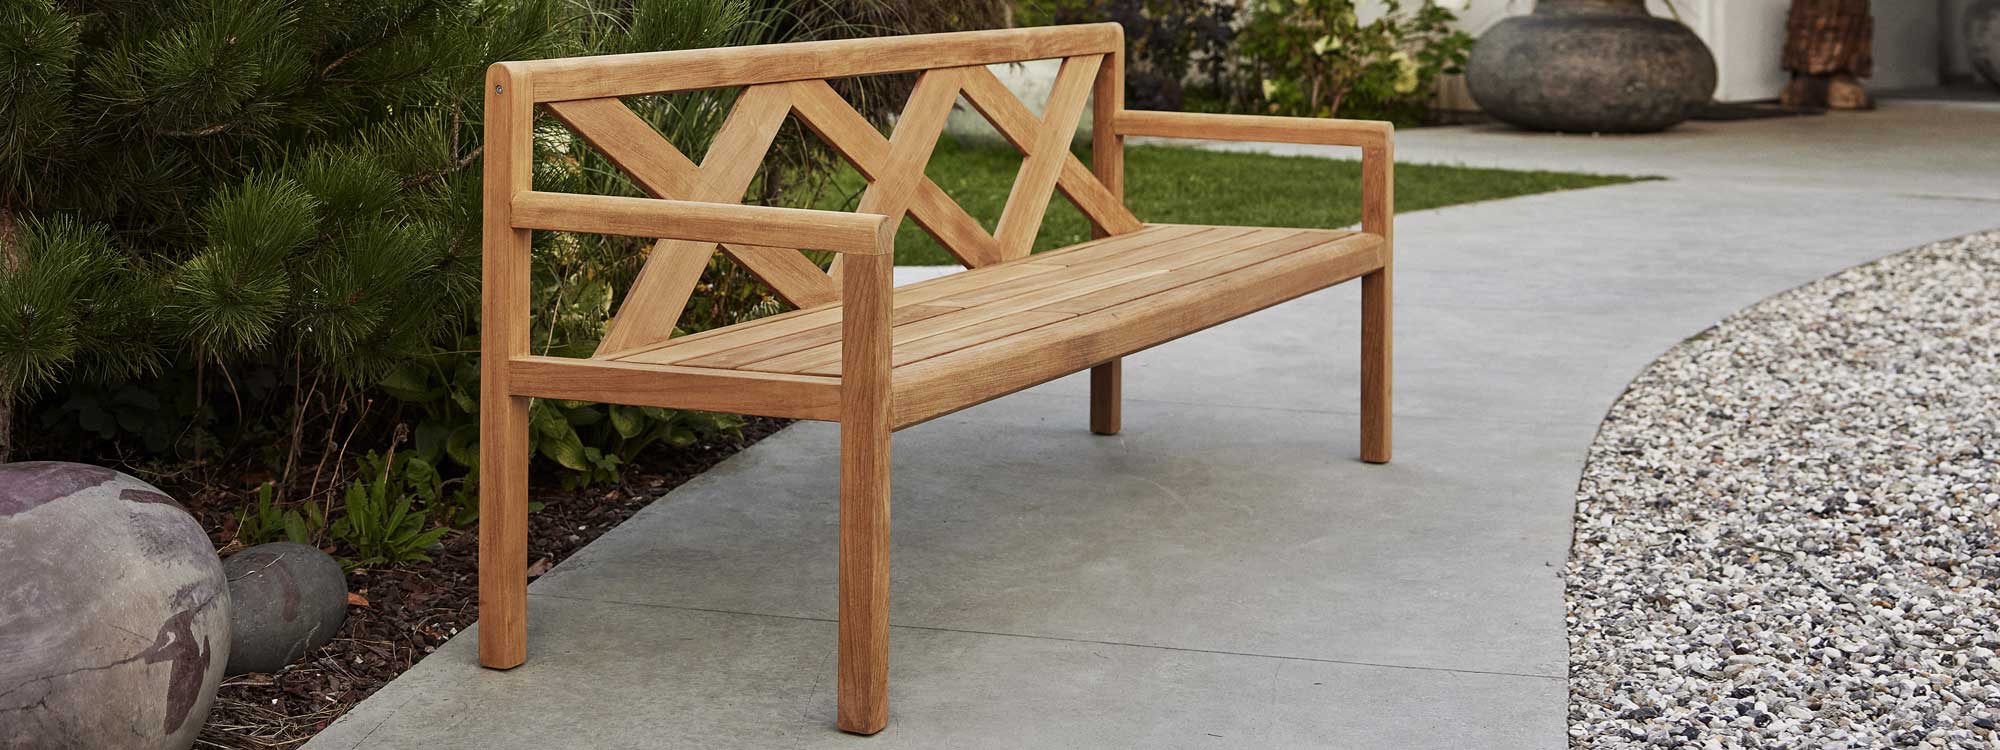 Image of Grace 3 seat teak bench by Cane-line, on poured concrete pathway in garden